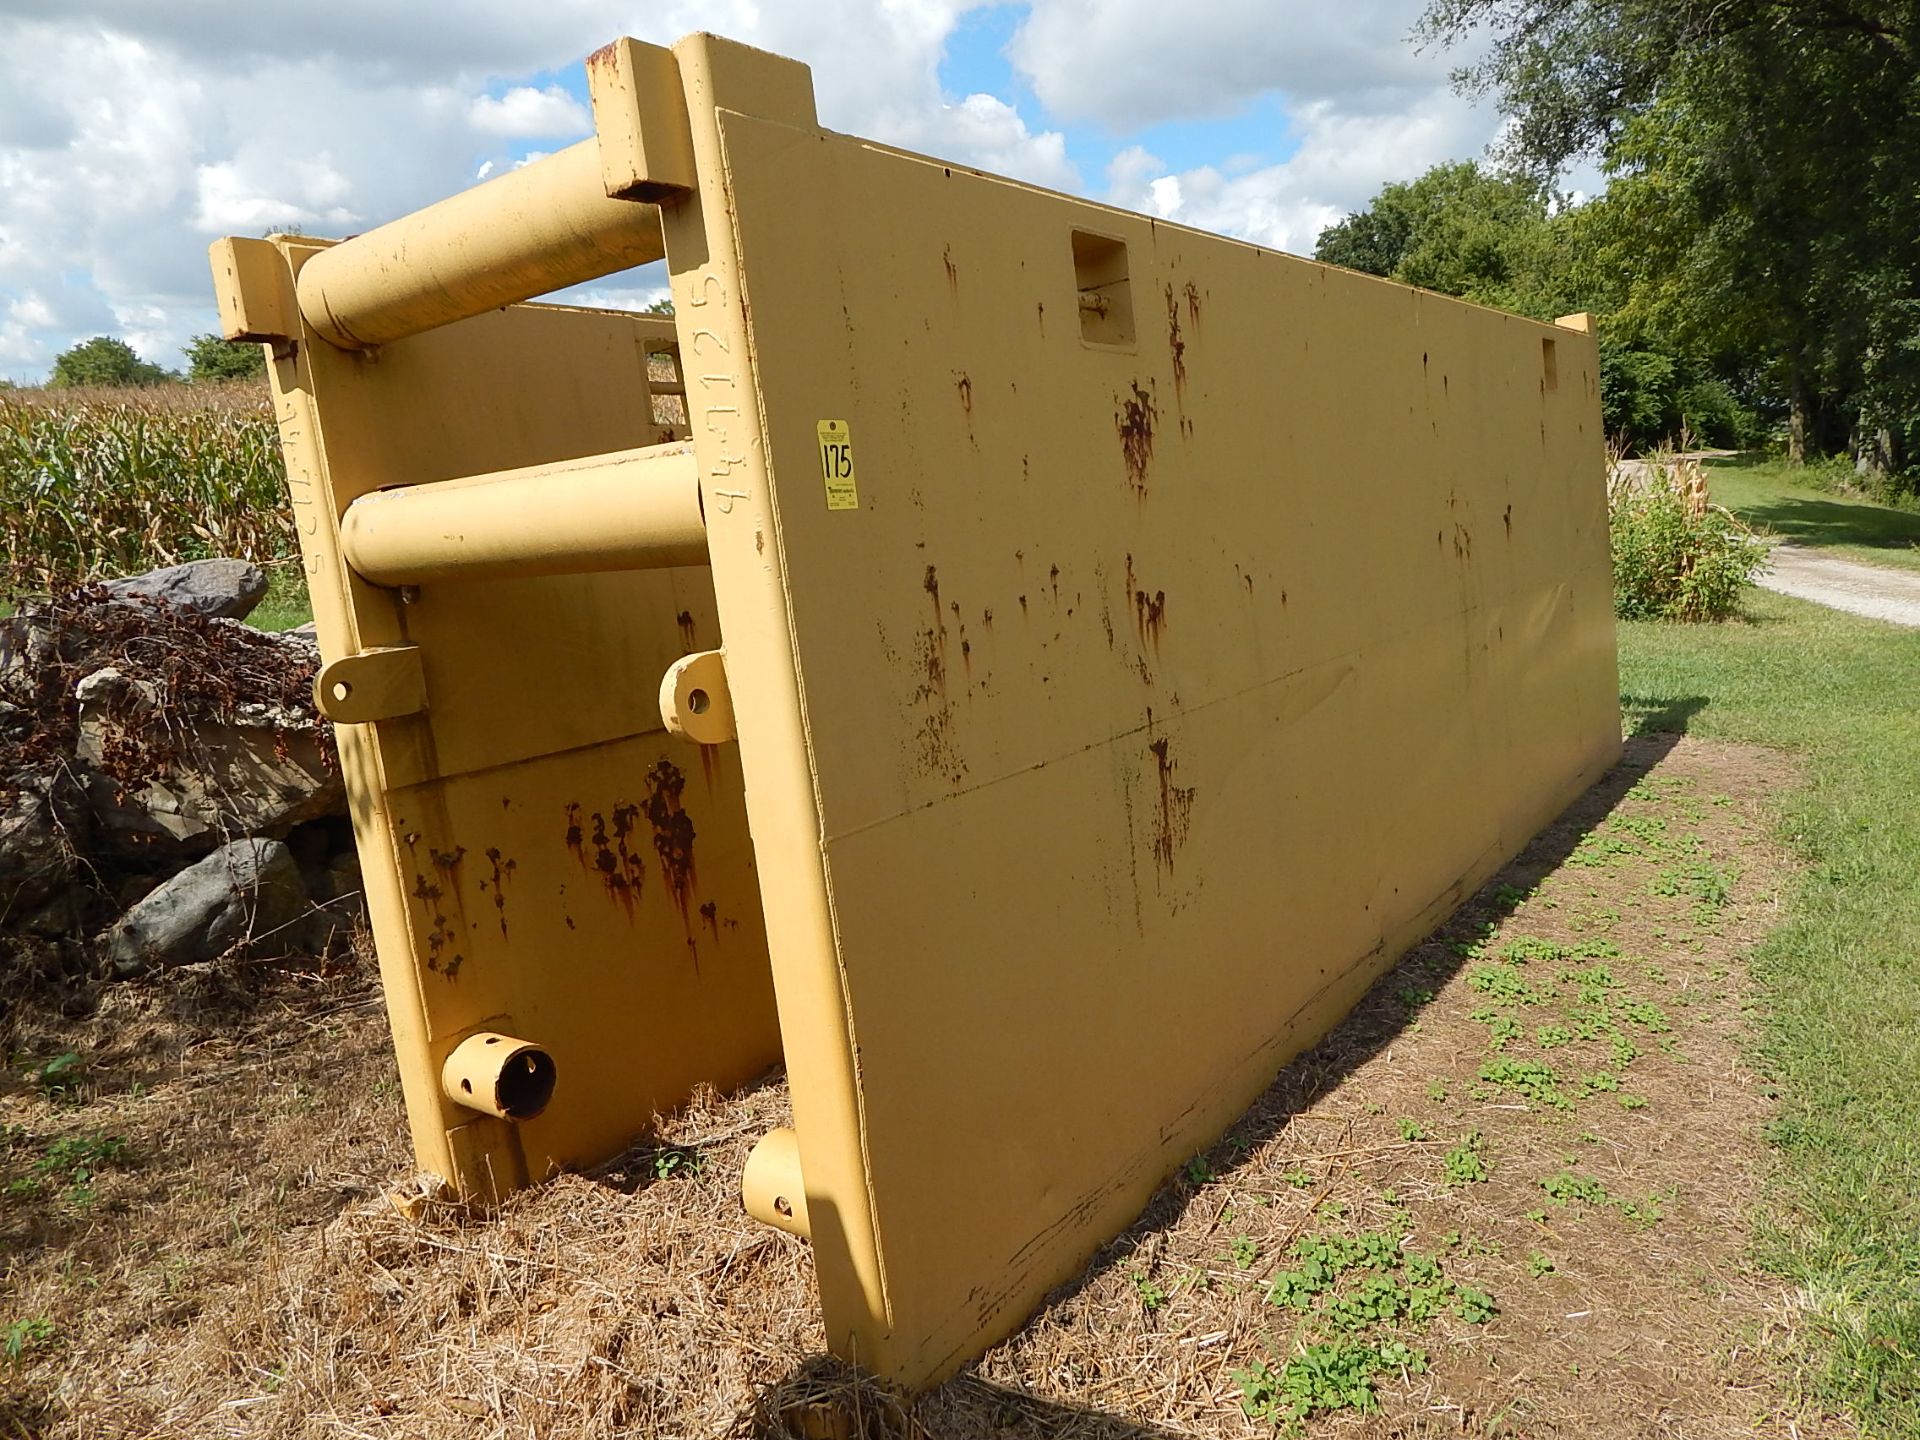 Shieldco Trenchbox Model 420R6, s/n 94-7125, 8 ft High x 20 ft Long x 6 in Thick w/48" Spreader